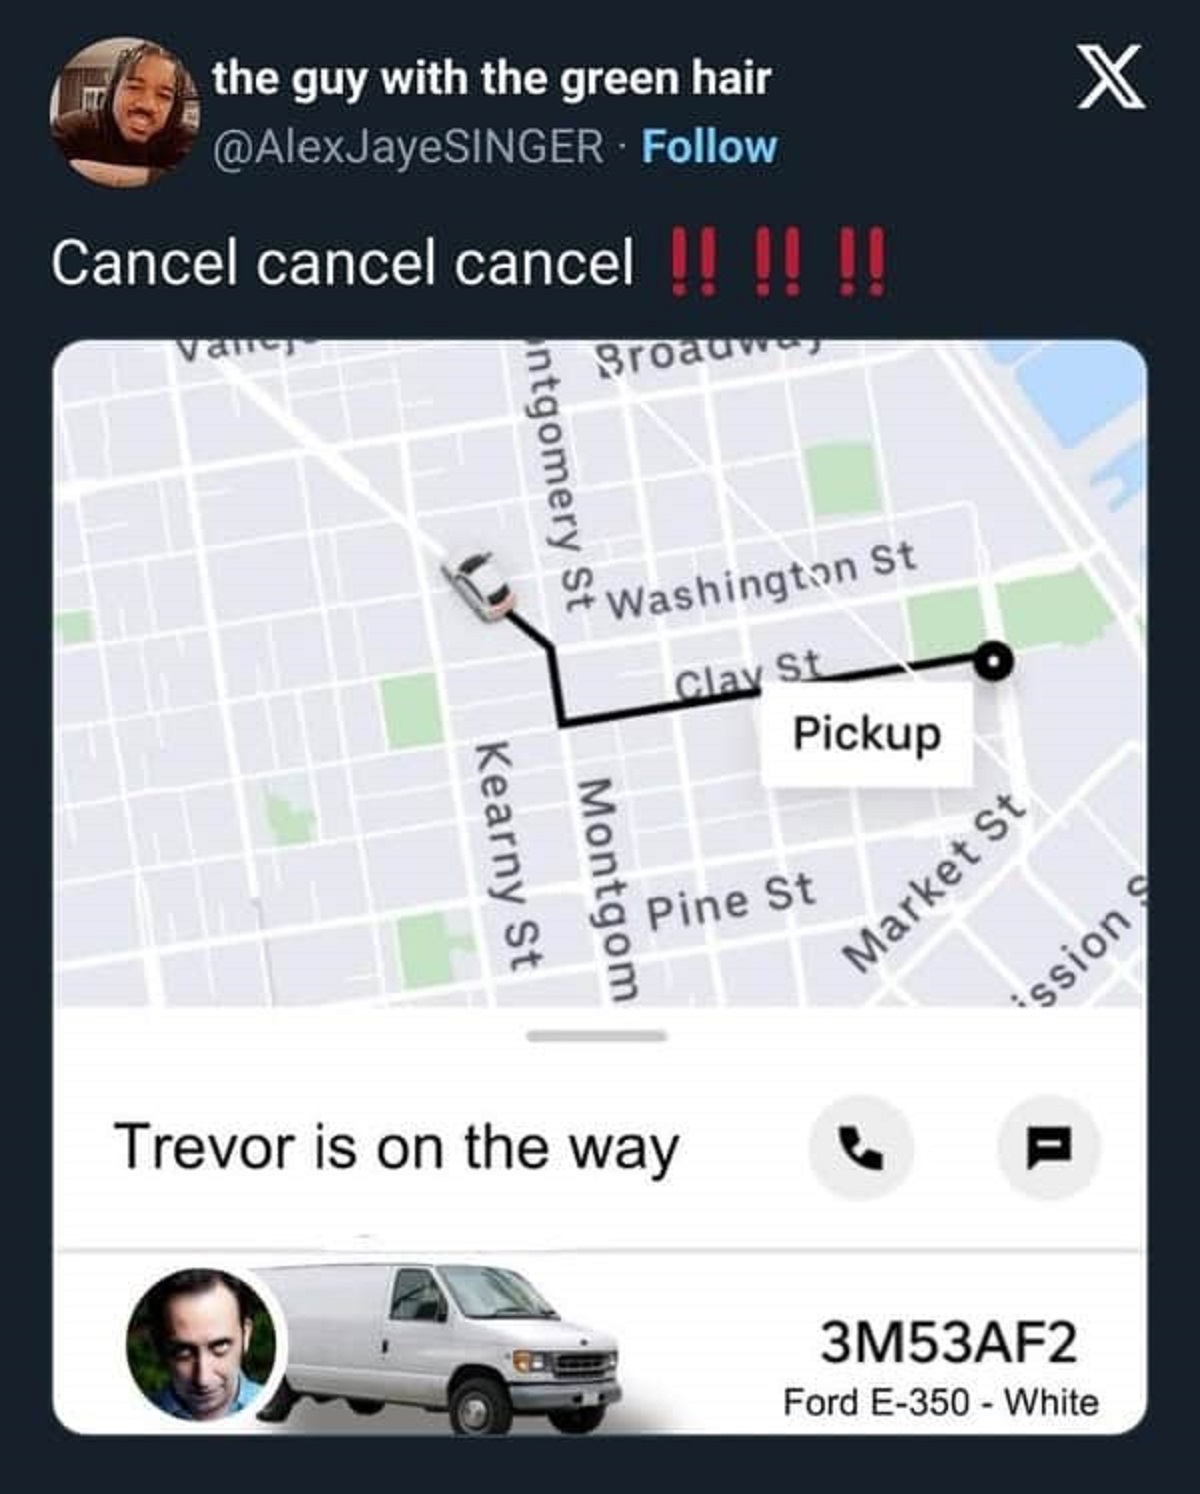 screenshot - the guy with the green hair Cancel cancel cancel !! !! !! Valley Broadway ntgomery St Washington St Clay St Pickup Montgom Kearny St Pine St Trevor is on the way Market St X ssion S 3M53AF2 Ford E350 White